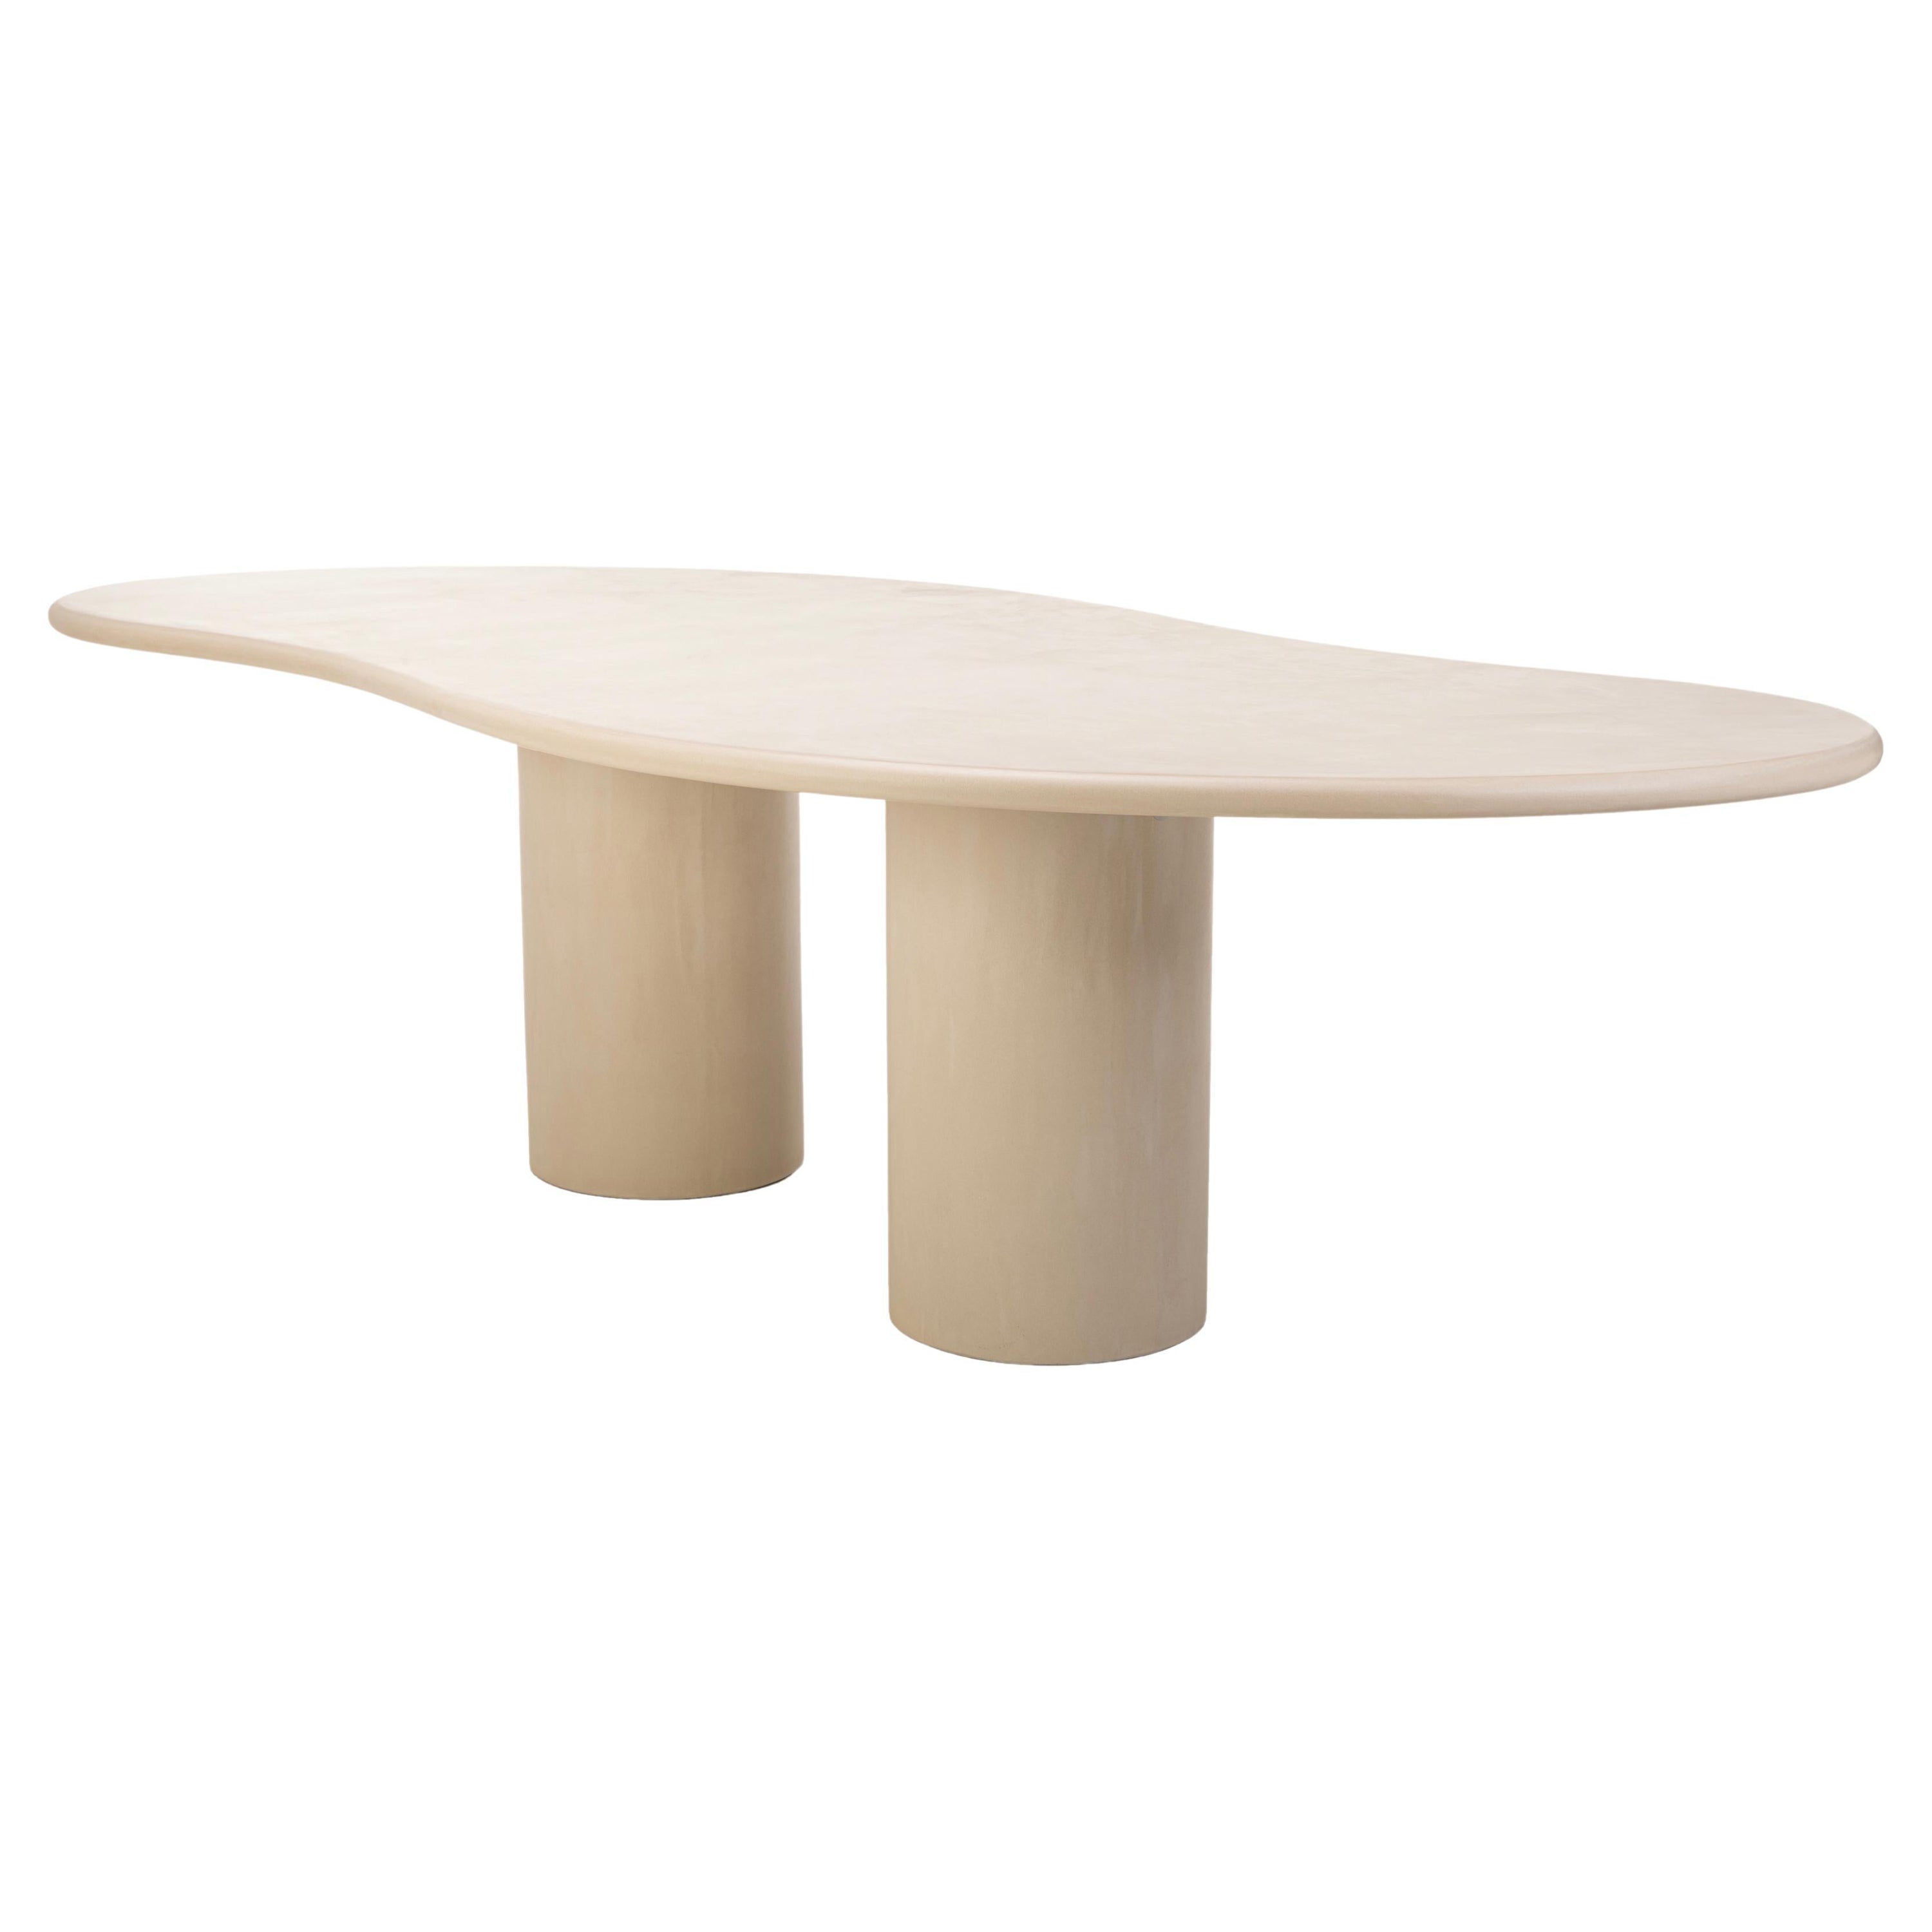 Natural Plaster Dining Table "Latus" 240 by Isabelle Beaumont For Sale